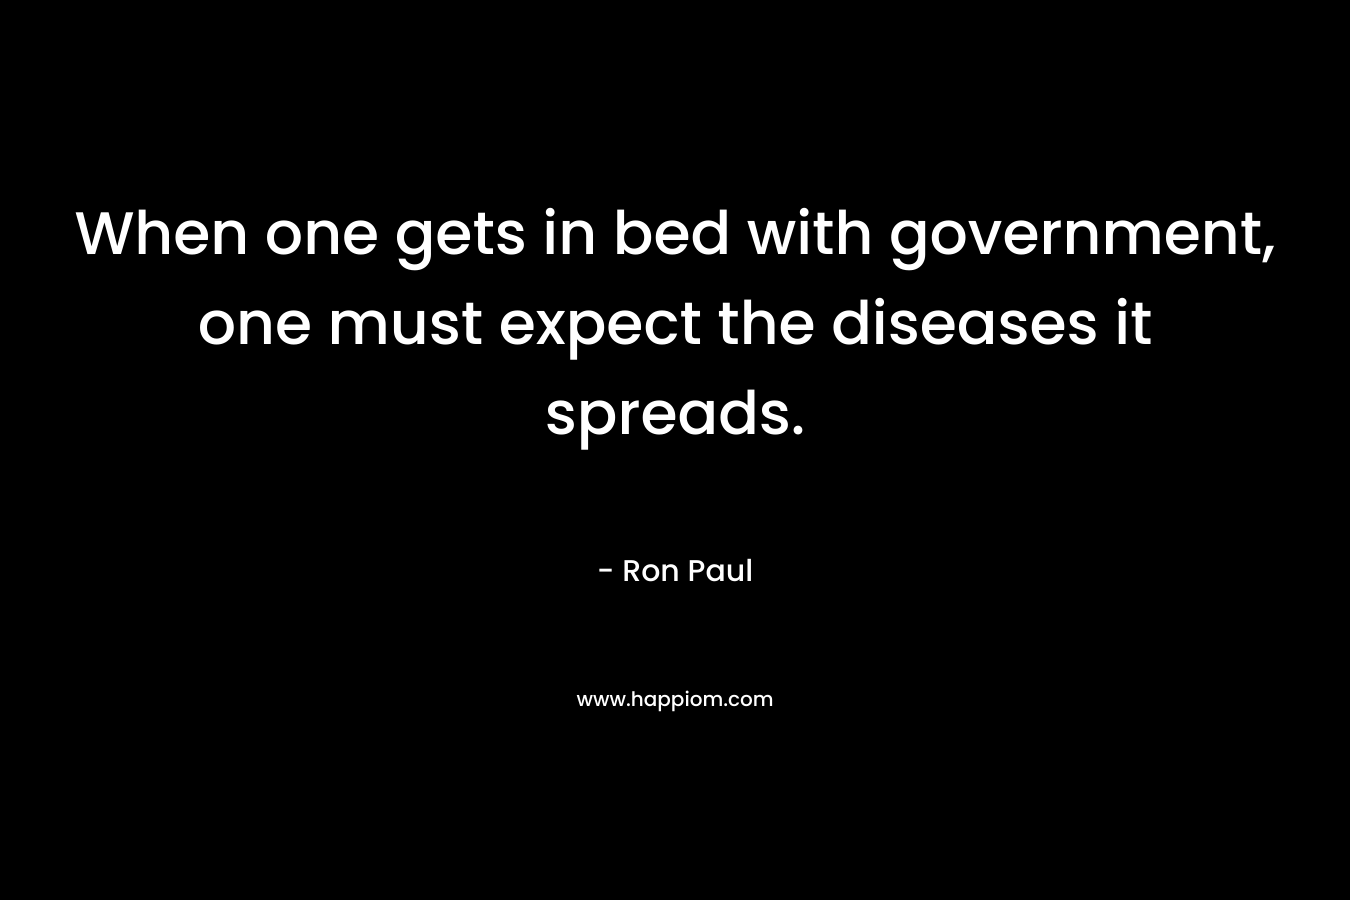 When one gets in bed with government, one must expect the diseases it spreads. – Ron Paul